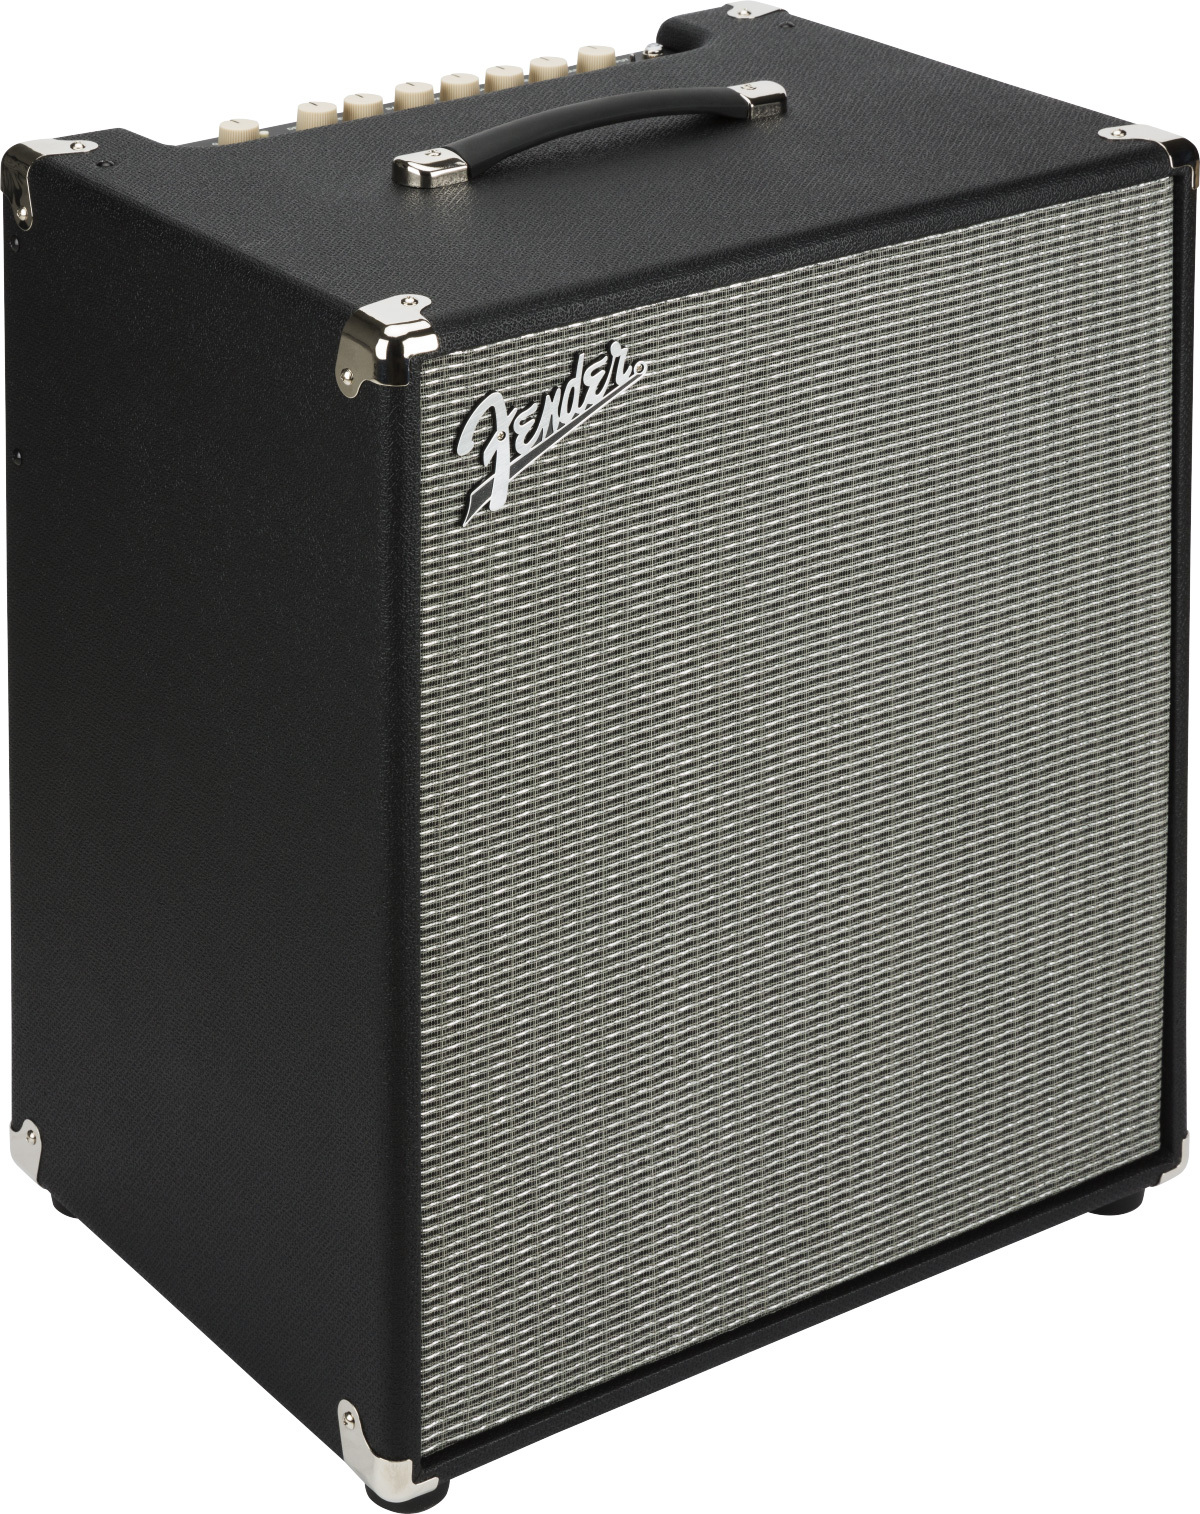 Fender Rumble 800 Combo 800w 2x10 - Bass combo amp - Main picture